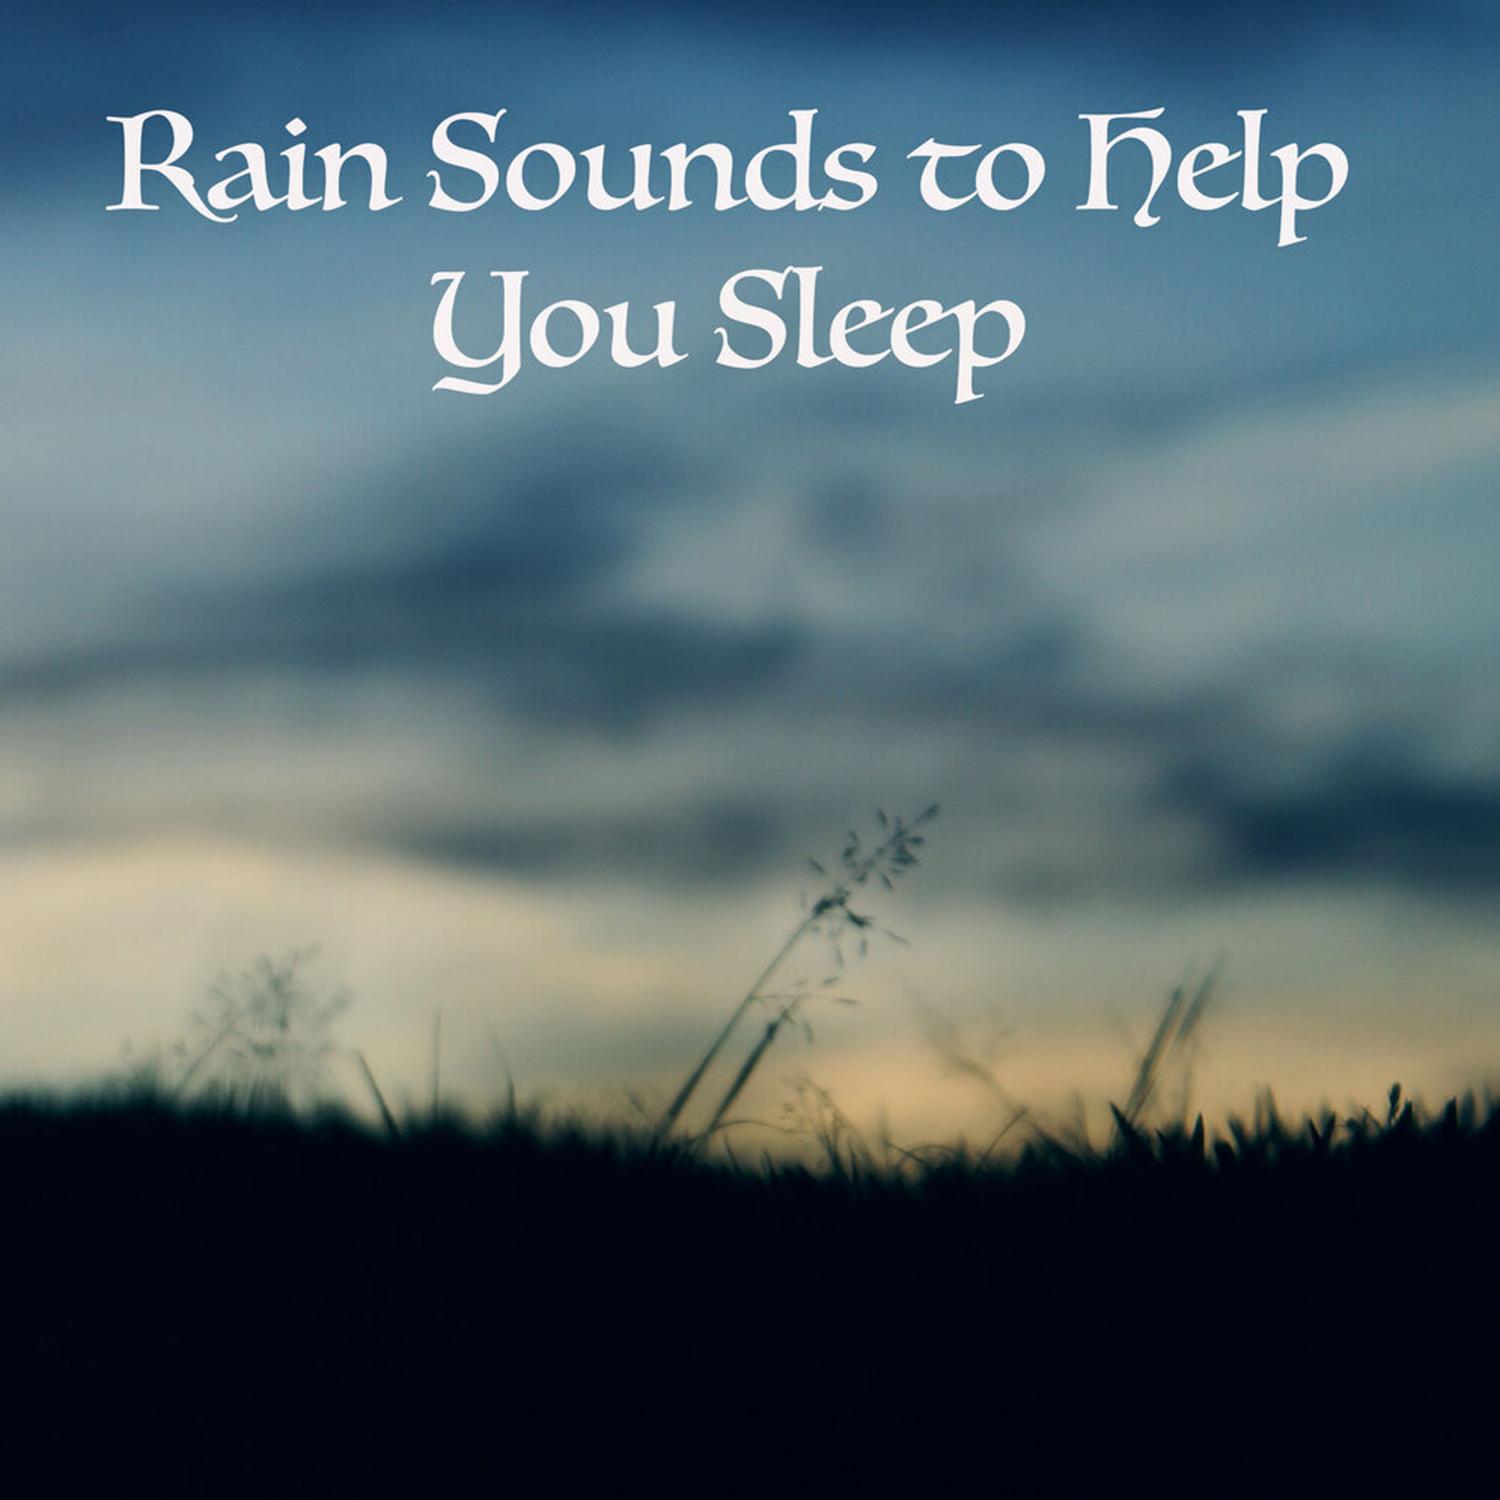 15 Sounds Proven to Help You Sleep All Night - No Fades - Loopable all Night